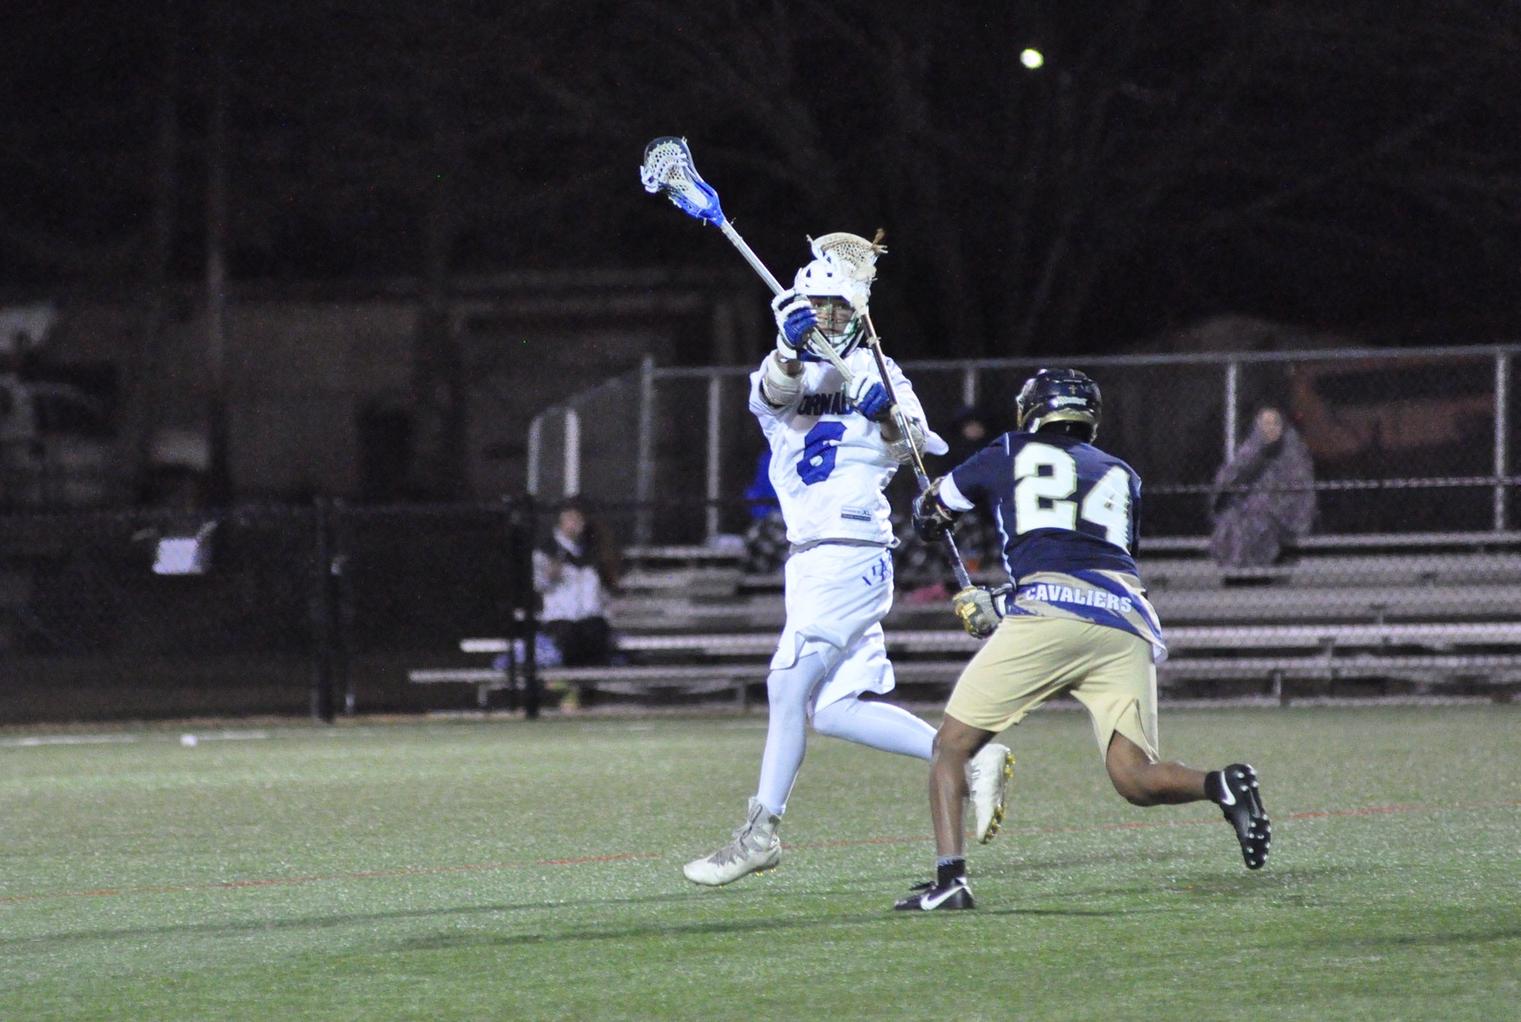 Brevard Opens Season with an Emphatic Win Against Montreat